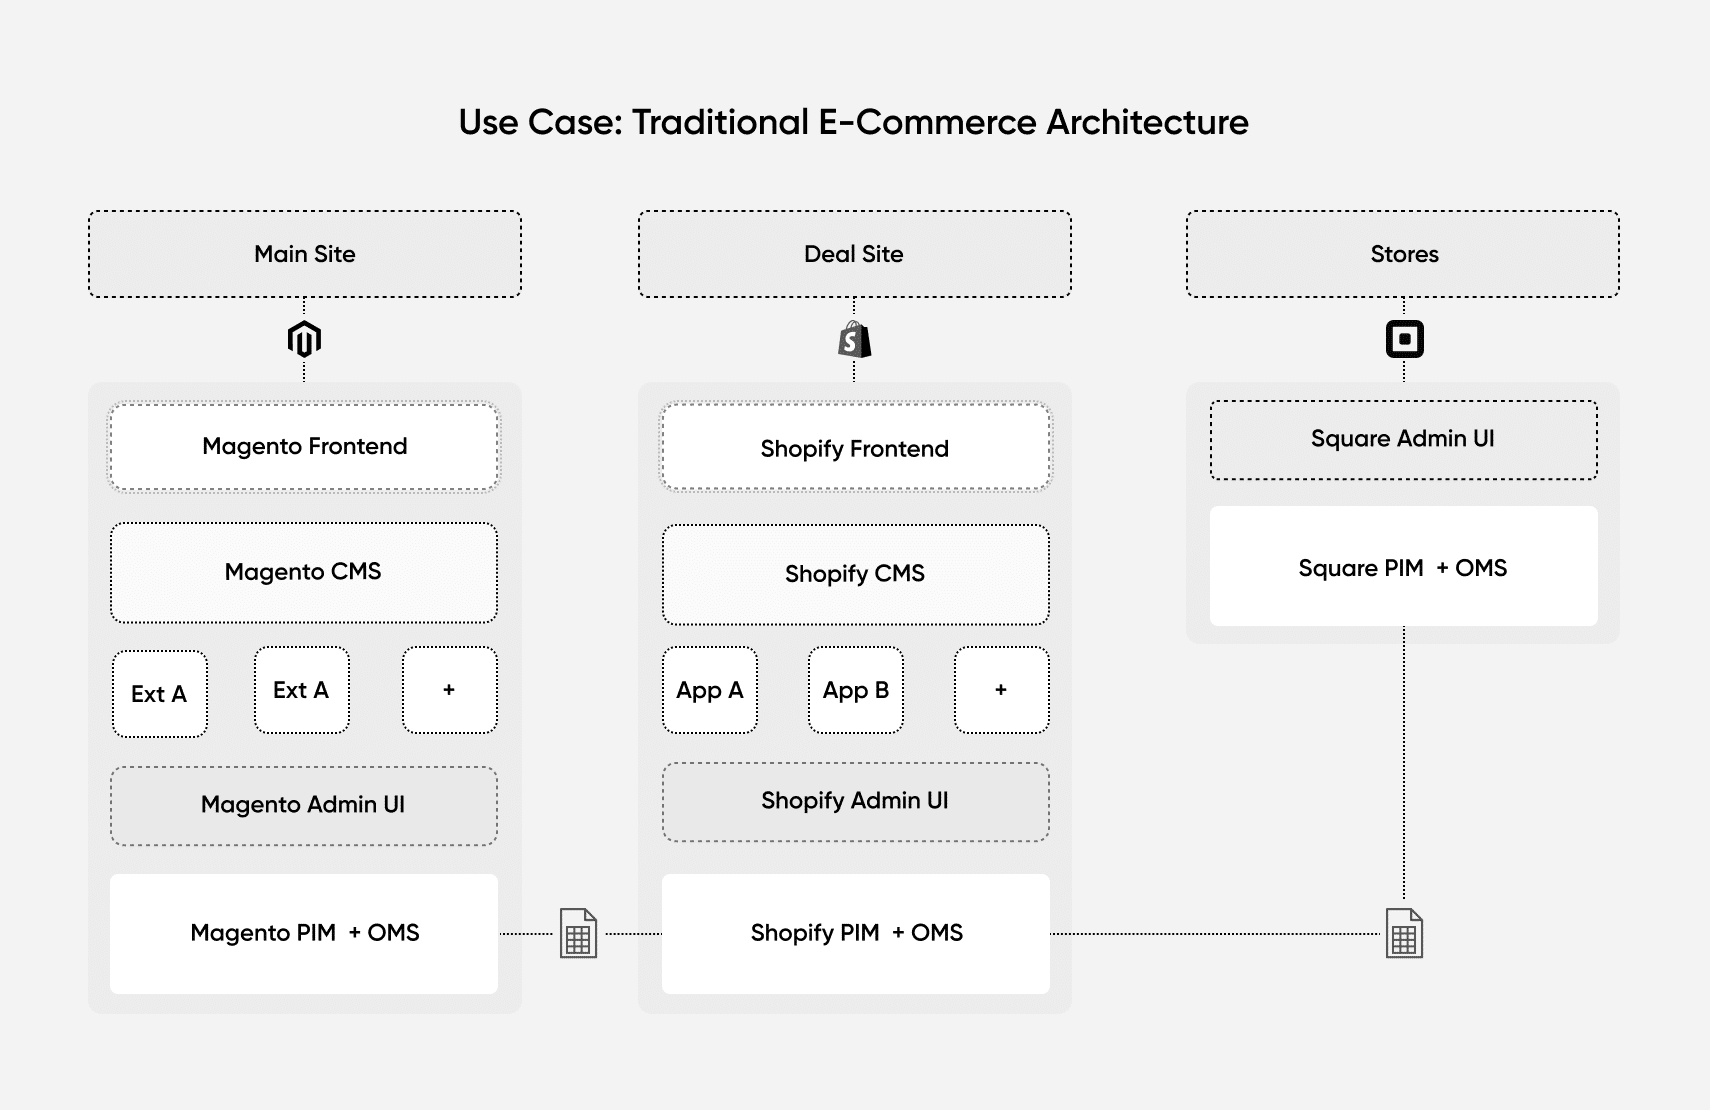 ecommerce-microservices-architecture-traditional-use-case